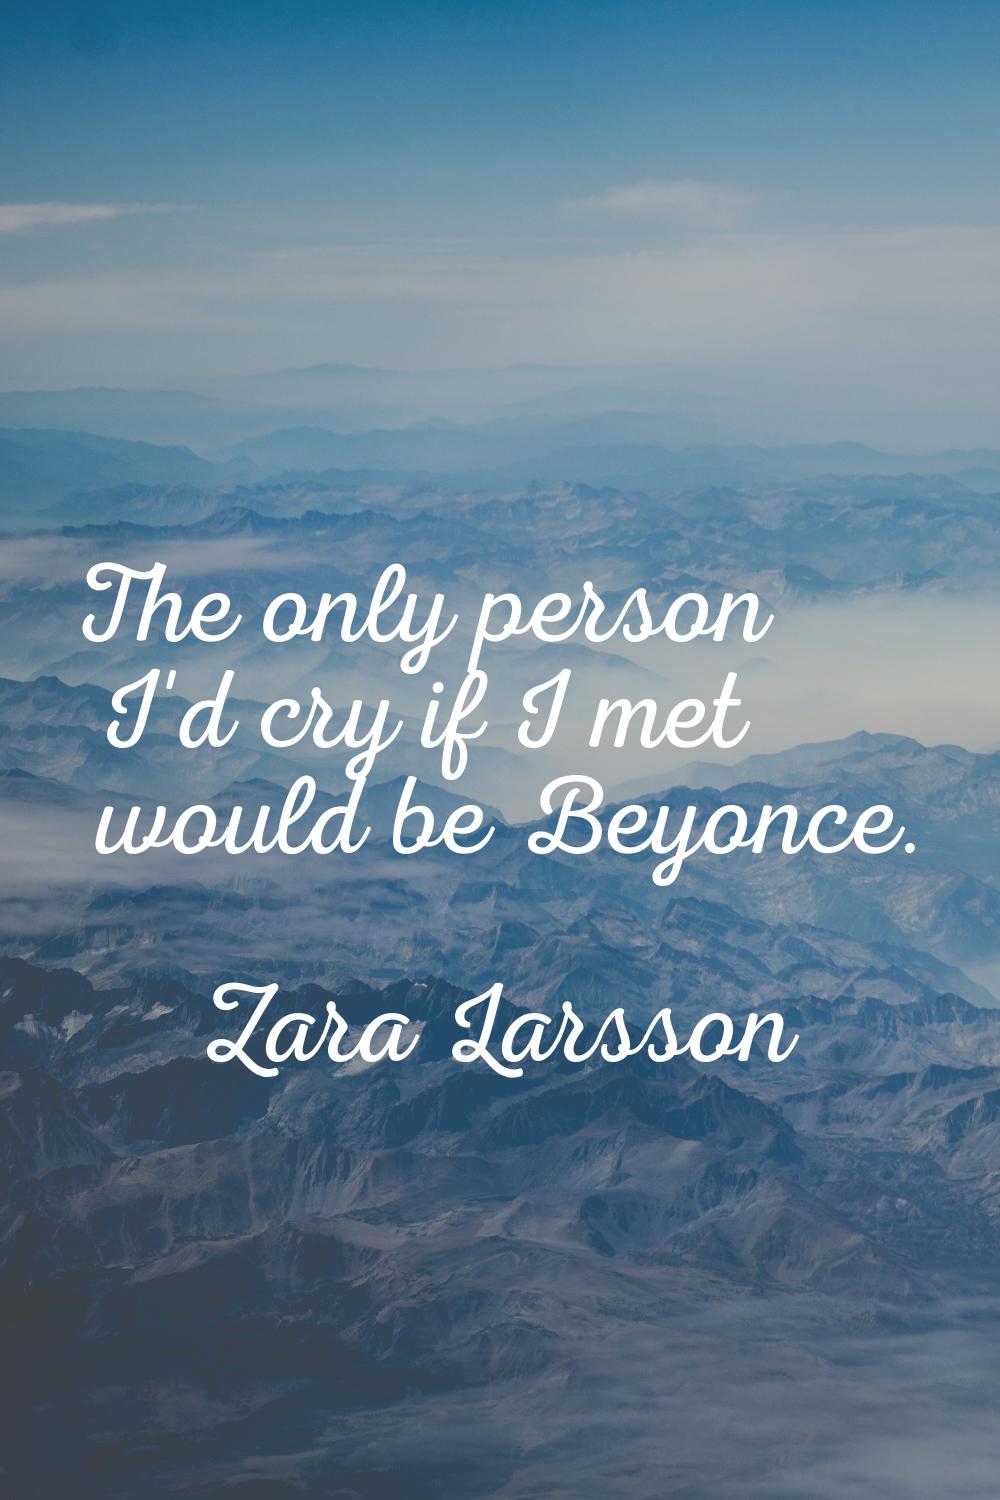 The only person I'd cry if I met would be Beyonce.